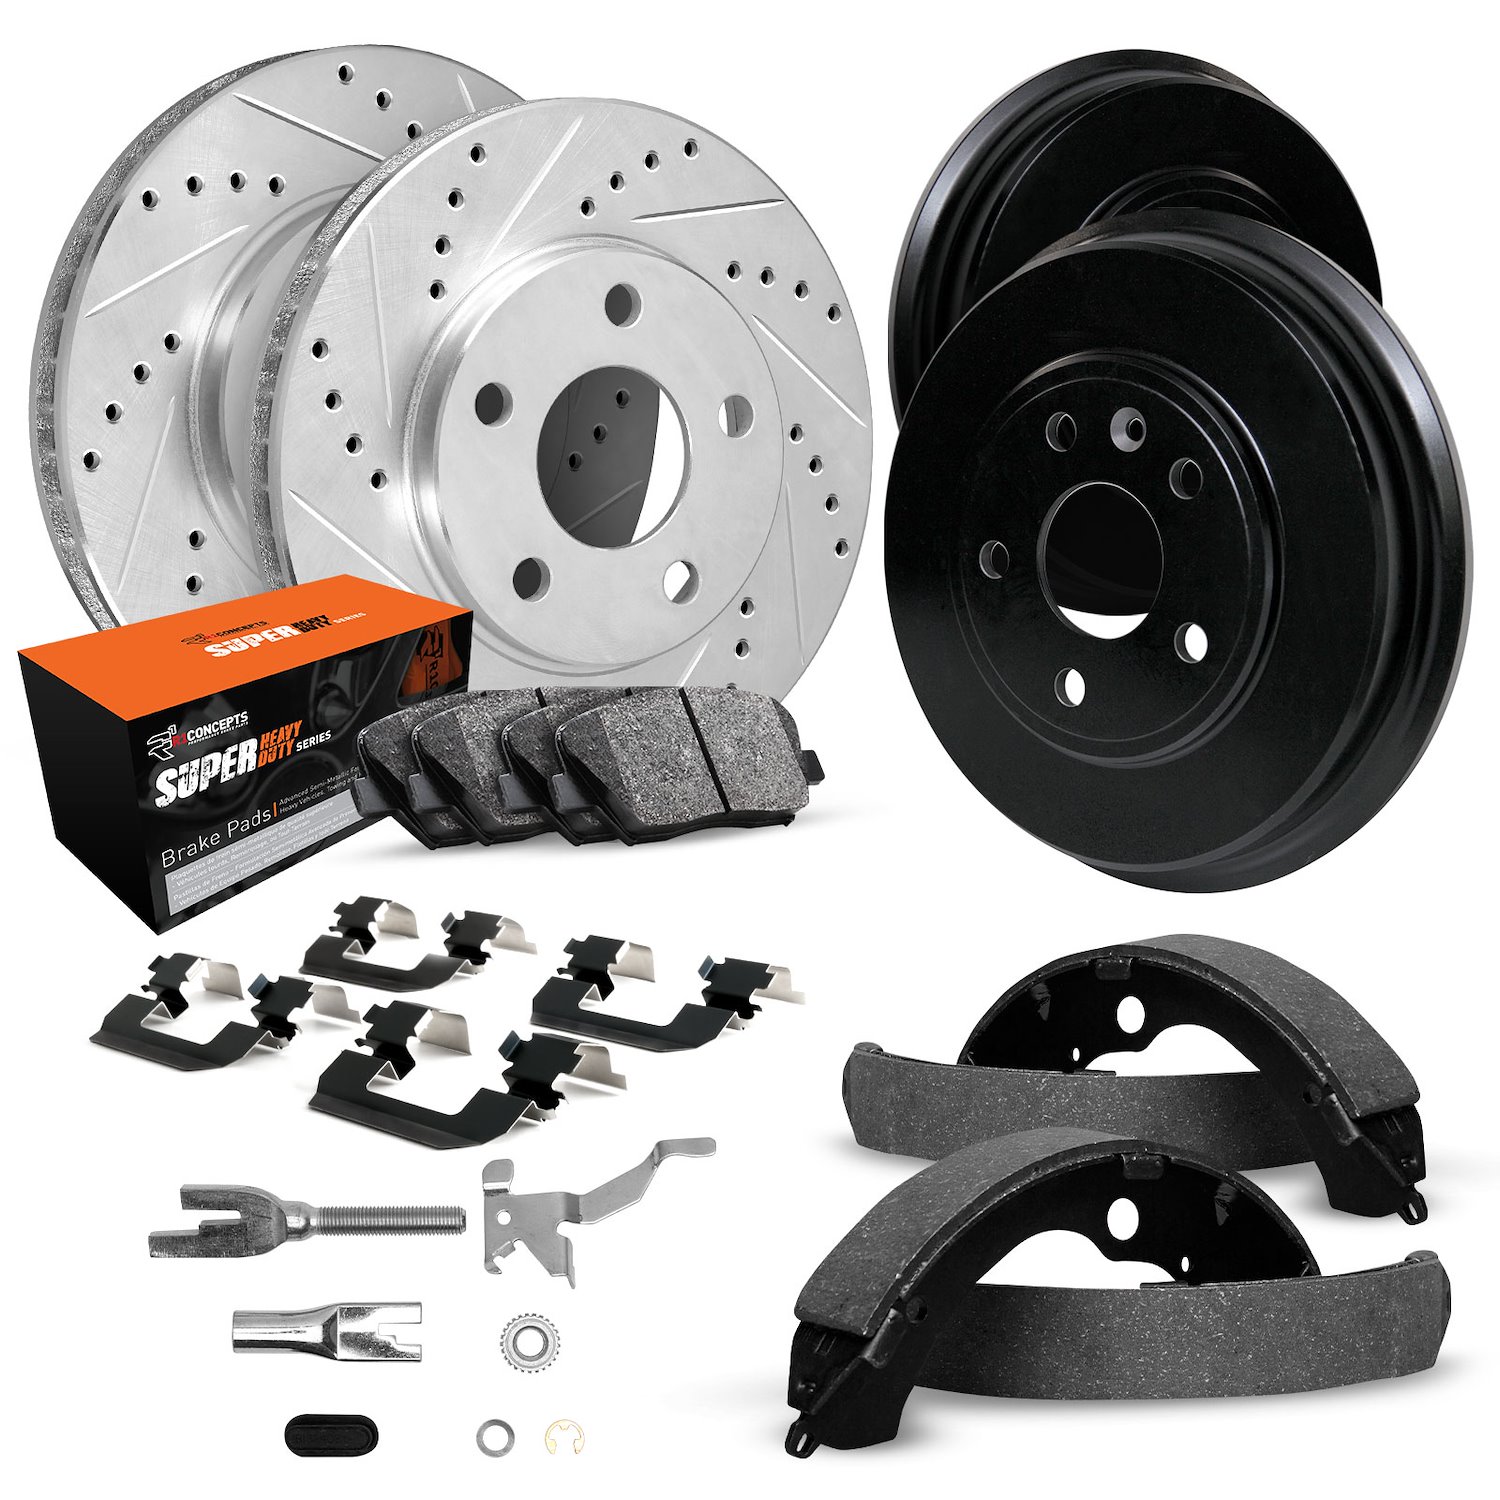 E-Line Drilled/Slotted Silver Rotor & Drum Set w/Super-Duty Pads, Shoes/Hardware/Adjusters, 1991-1999 Mopar